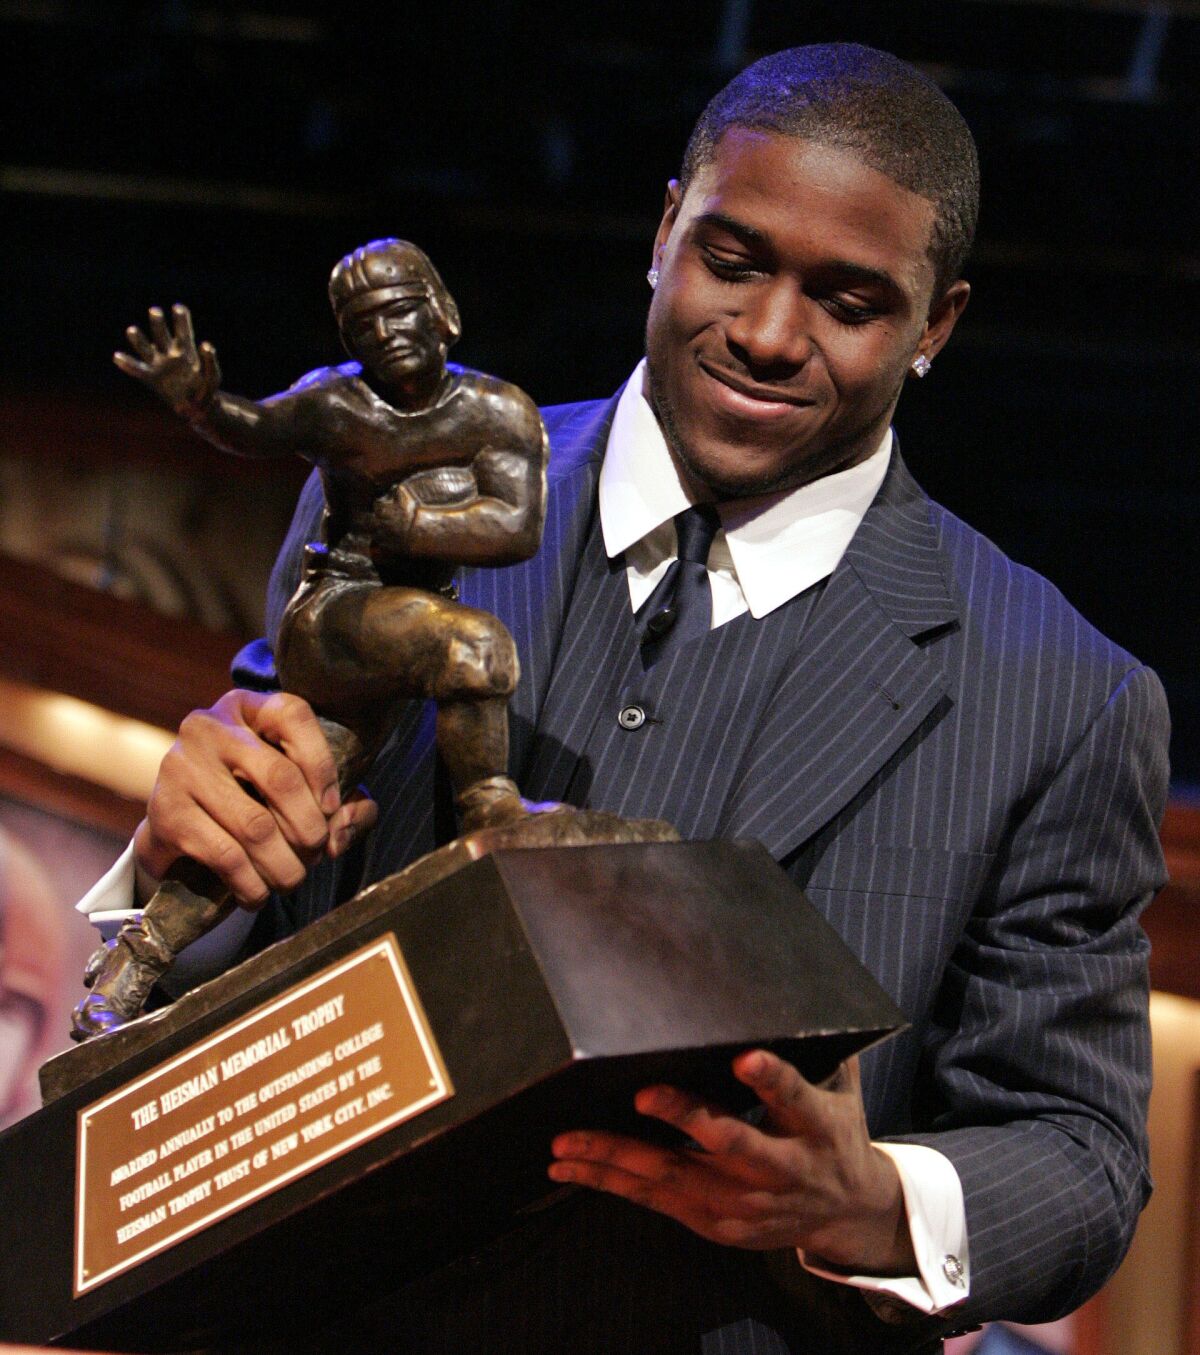 Reggie Bush picks up the Heisman Trophy after being announced as the winner in 2005. 